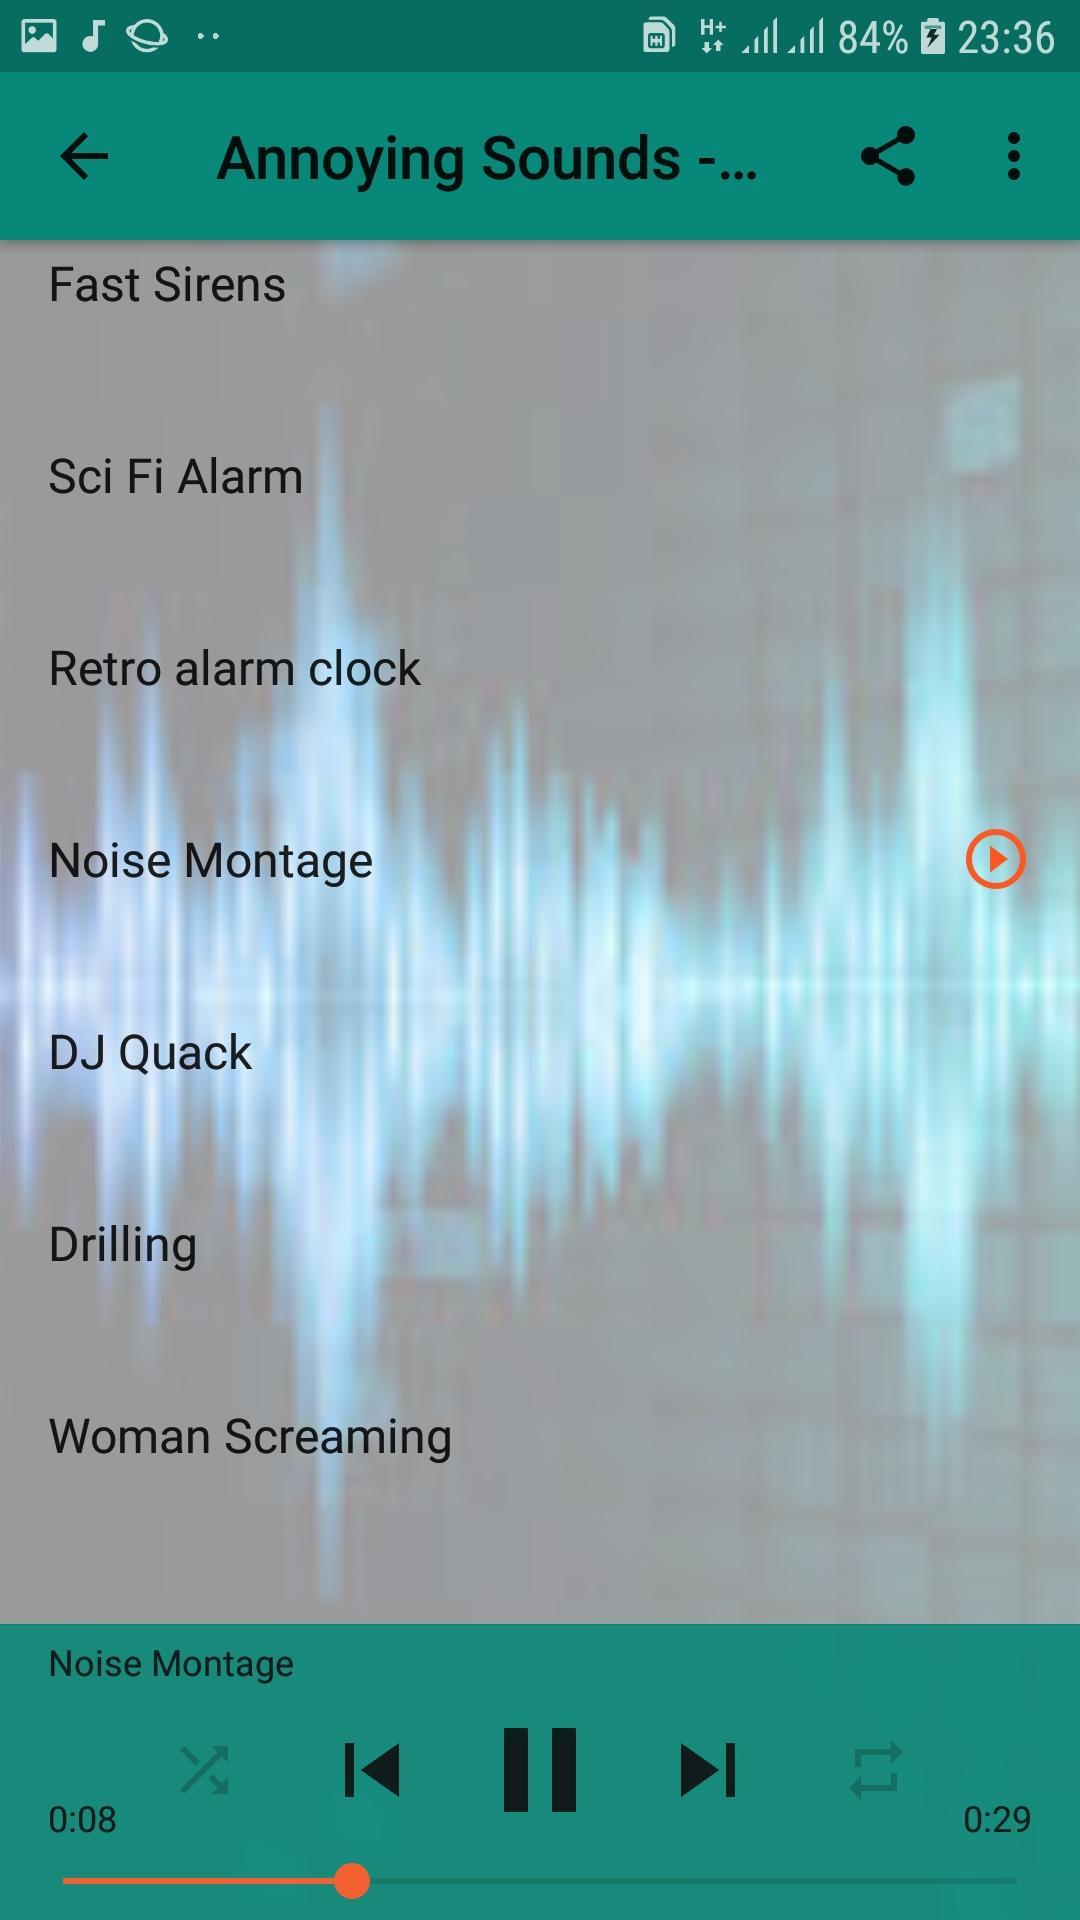 Annoying Sounds Irritating Very Annoying Sound For Android Apk Download - most annoying roblox sound is